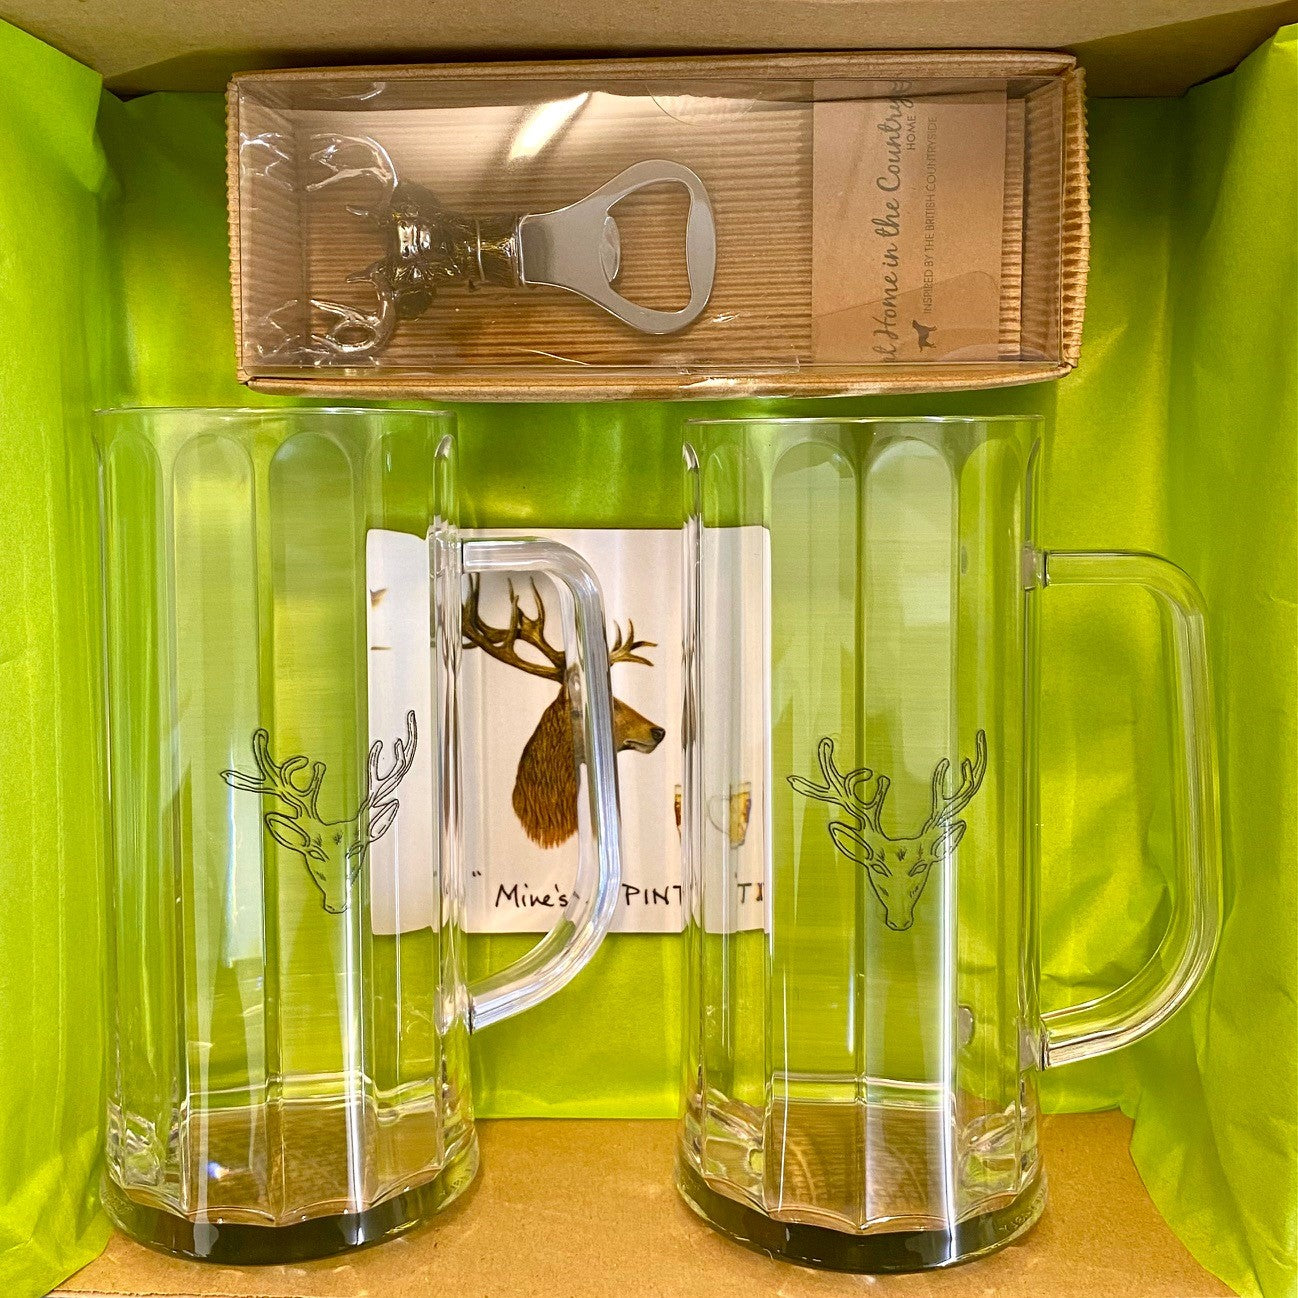 The "Stag Beer Gift Box"